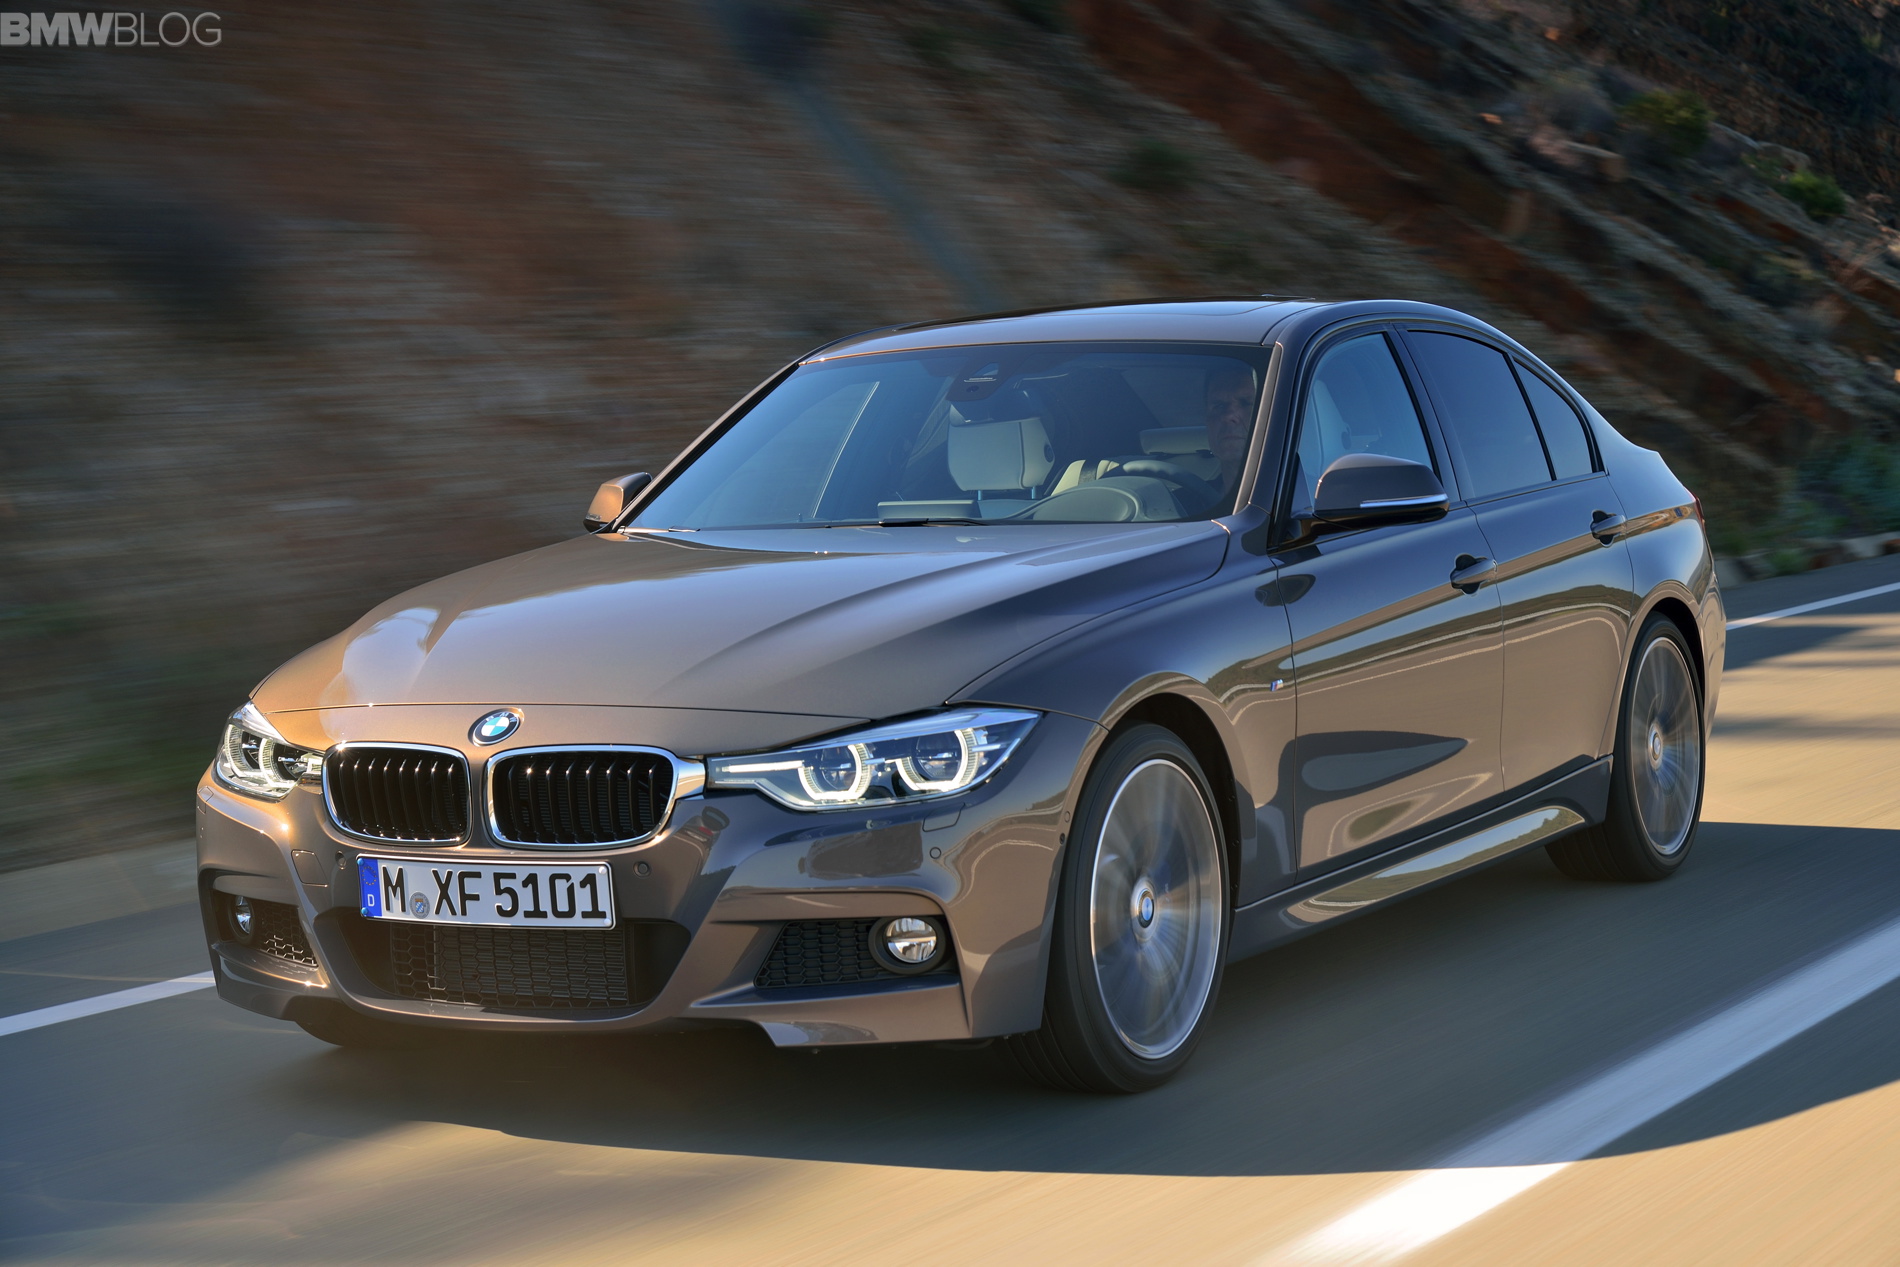 2015 BMW 3 Series Facelift - Exterior and Interior Changes